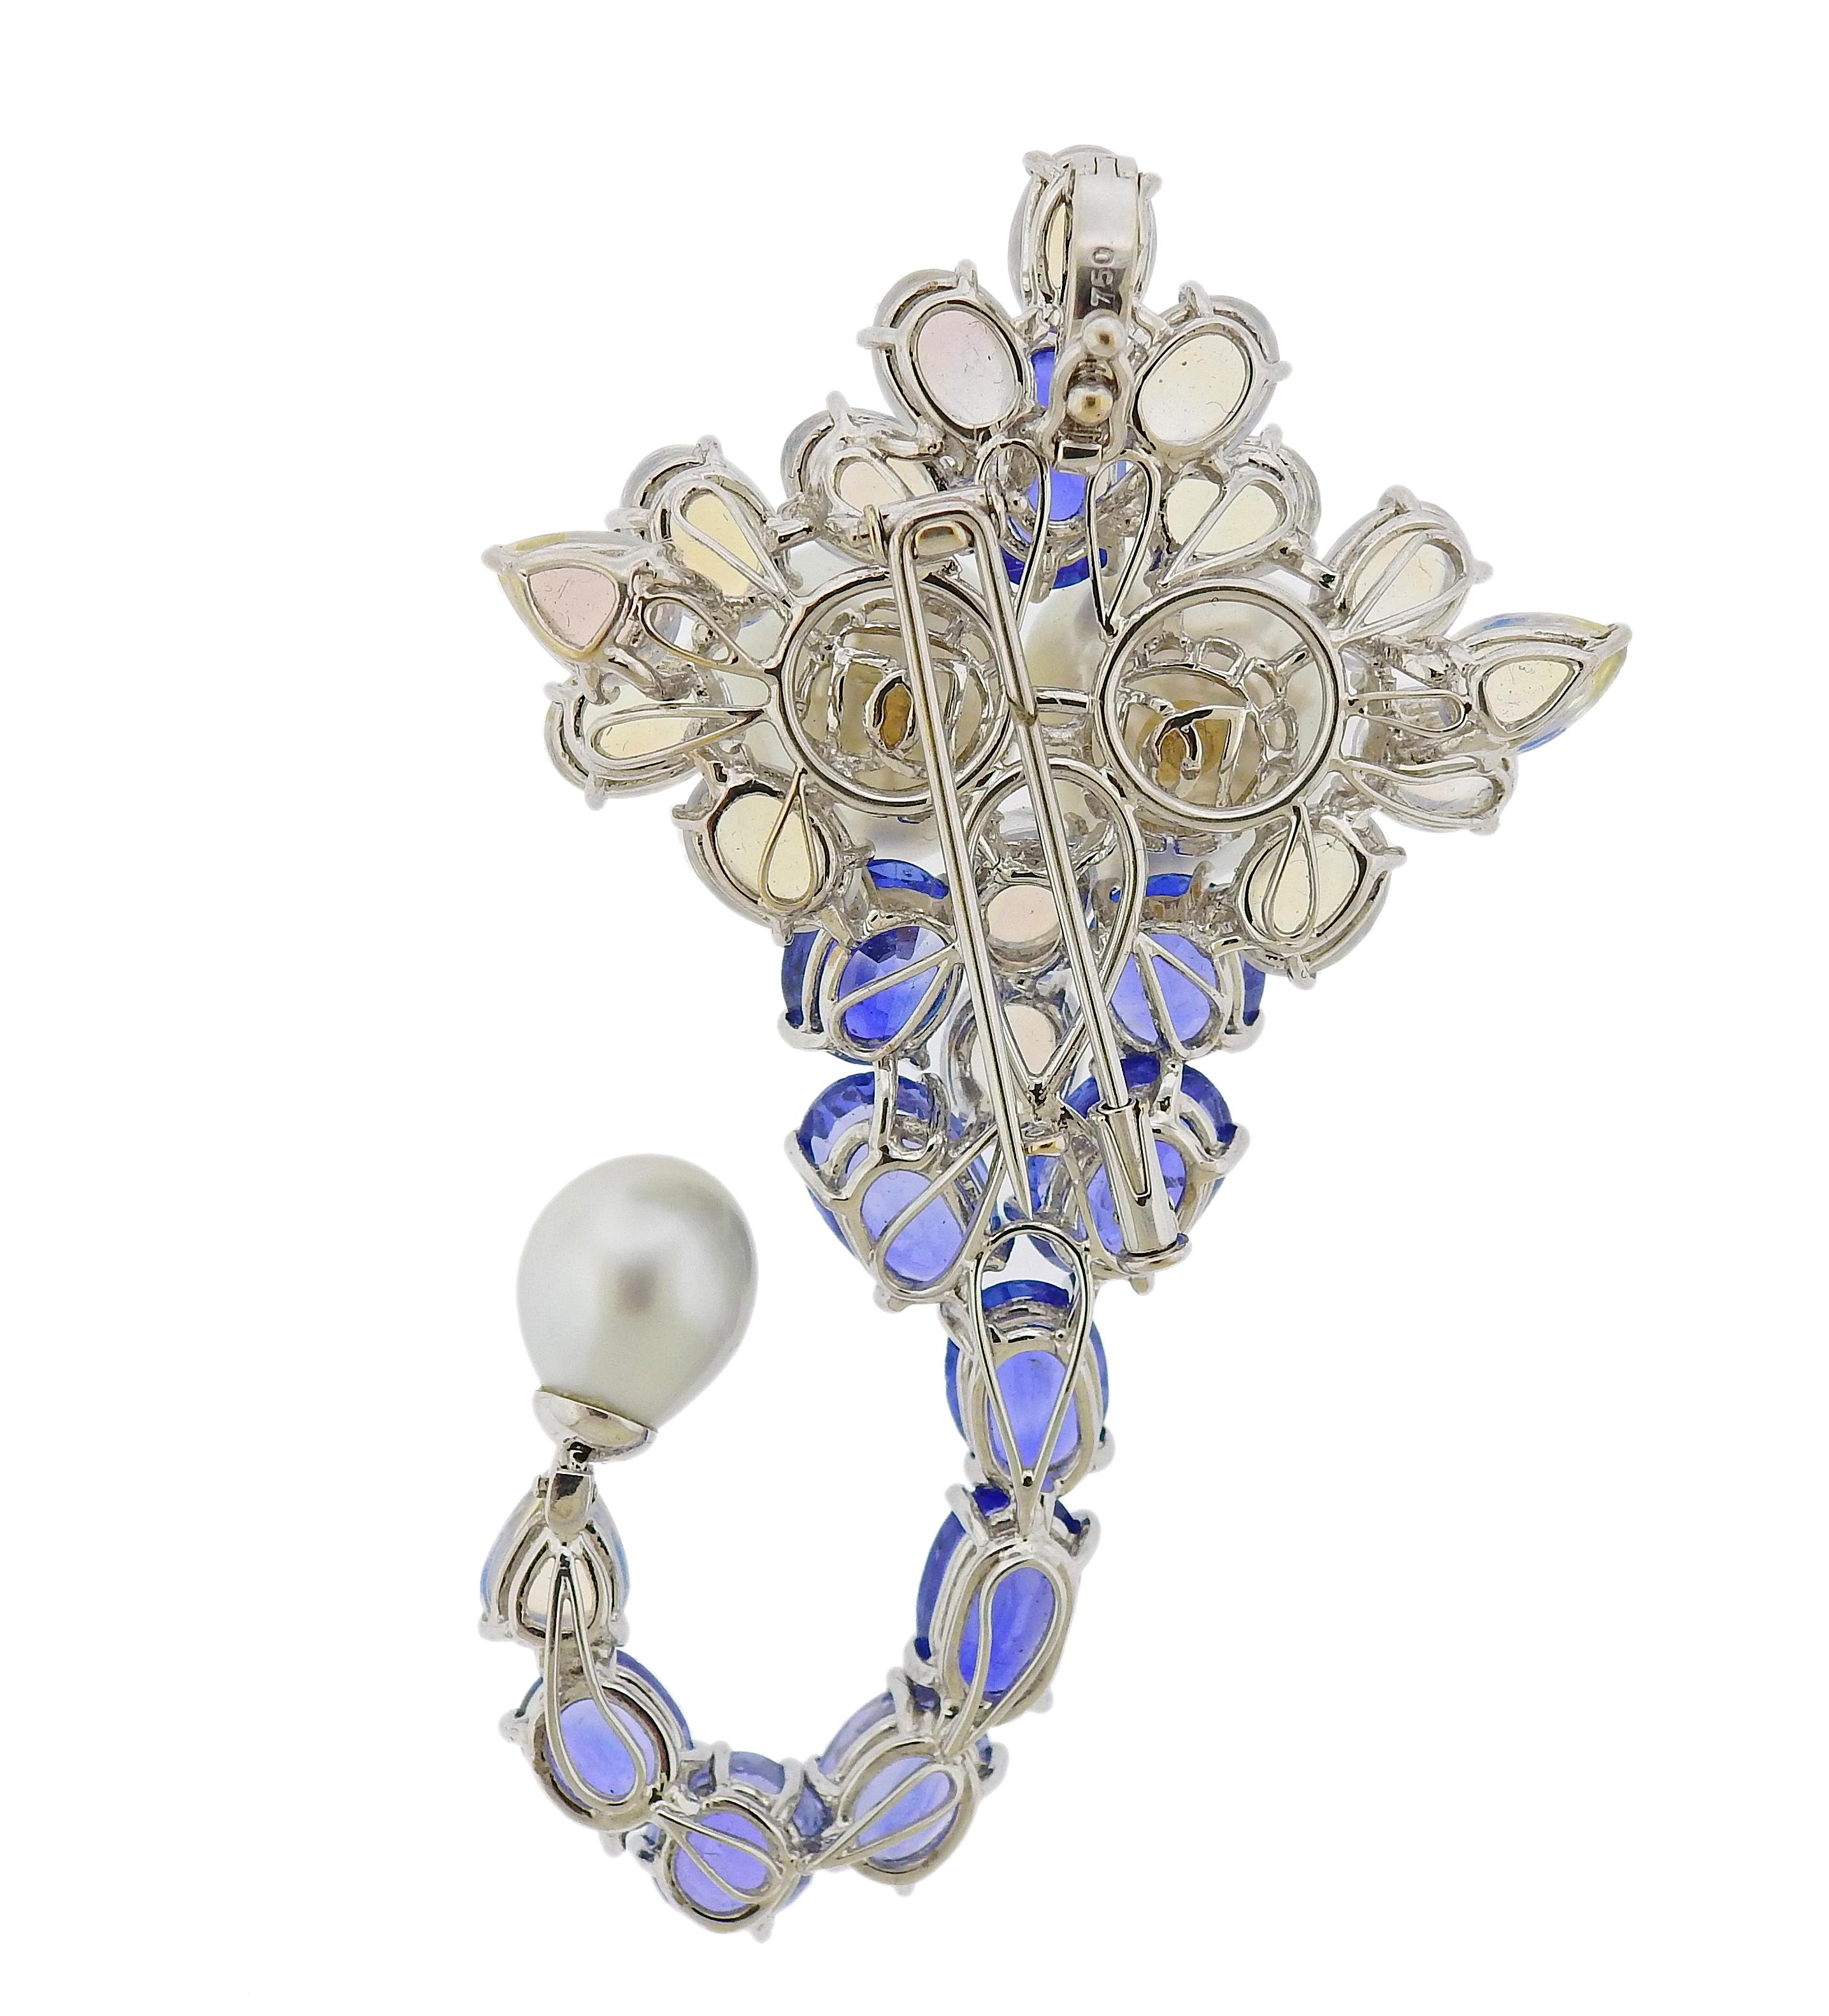 18k gold Brooch crafted by Assael for Prince Dimitri. Brooch features approximately 25.2ctw of blue sapphires, 21.10ctw in moonstone, and pearls. Retail is $27,200. Pendant/Brooch is 75mm x 47mm, Pearls are 10mm diameter; 15.1mm x 14.2mm. Total